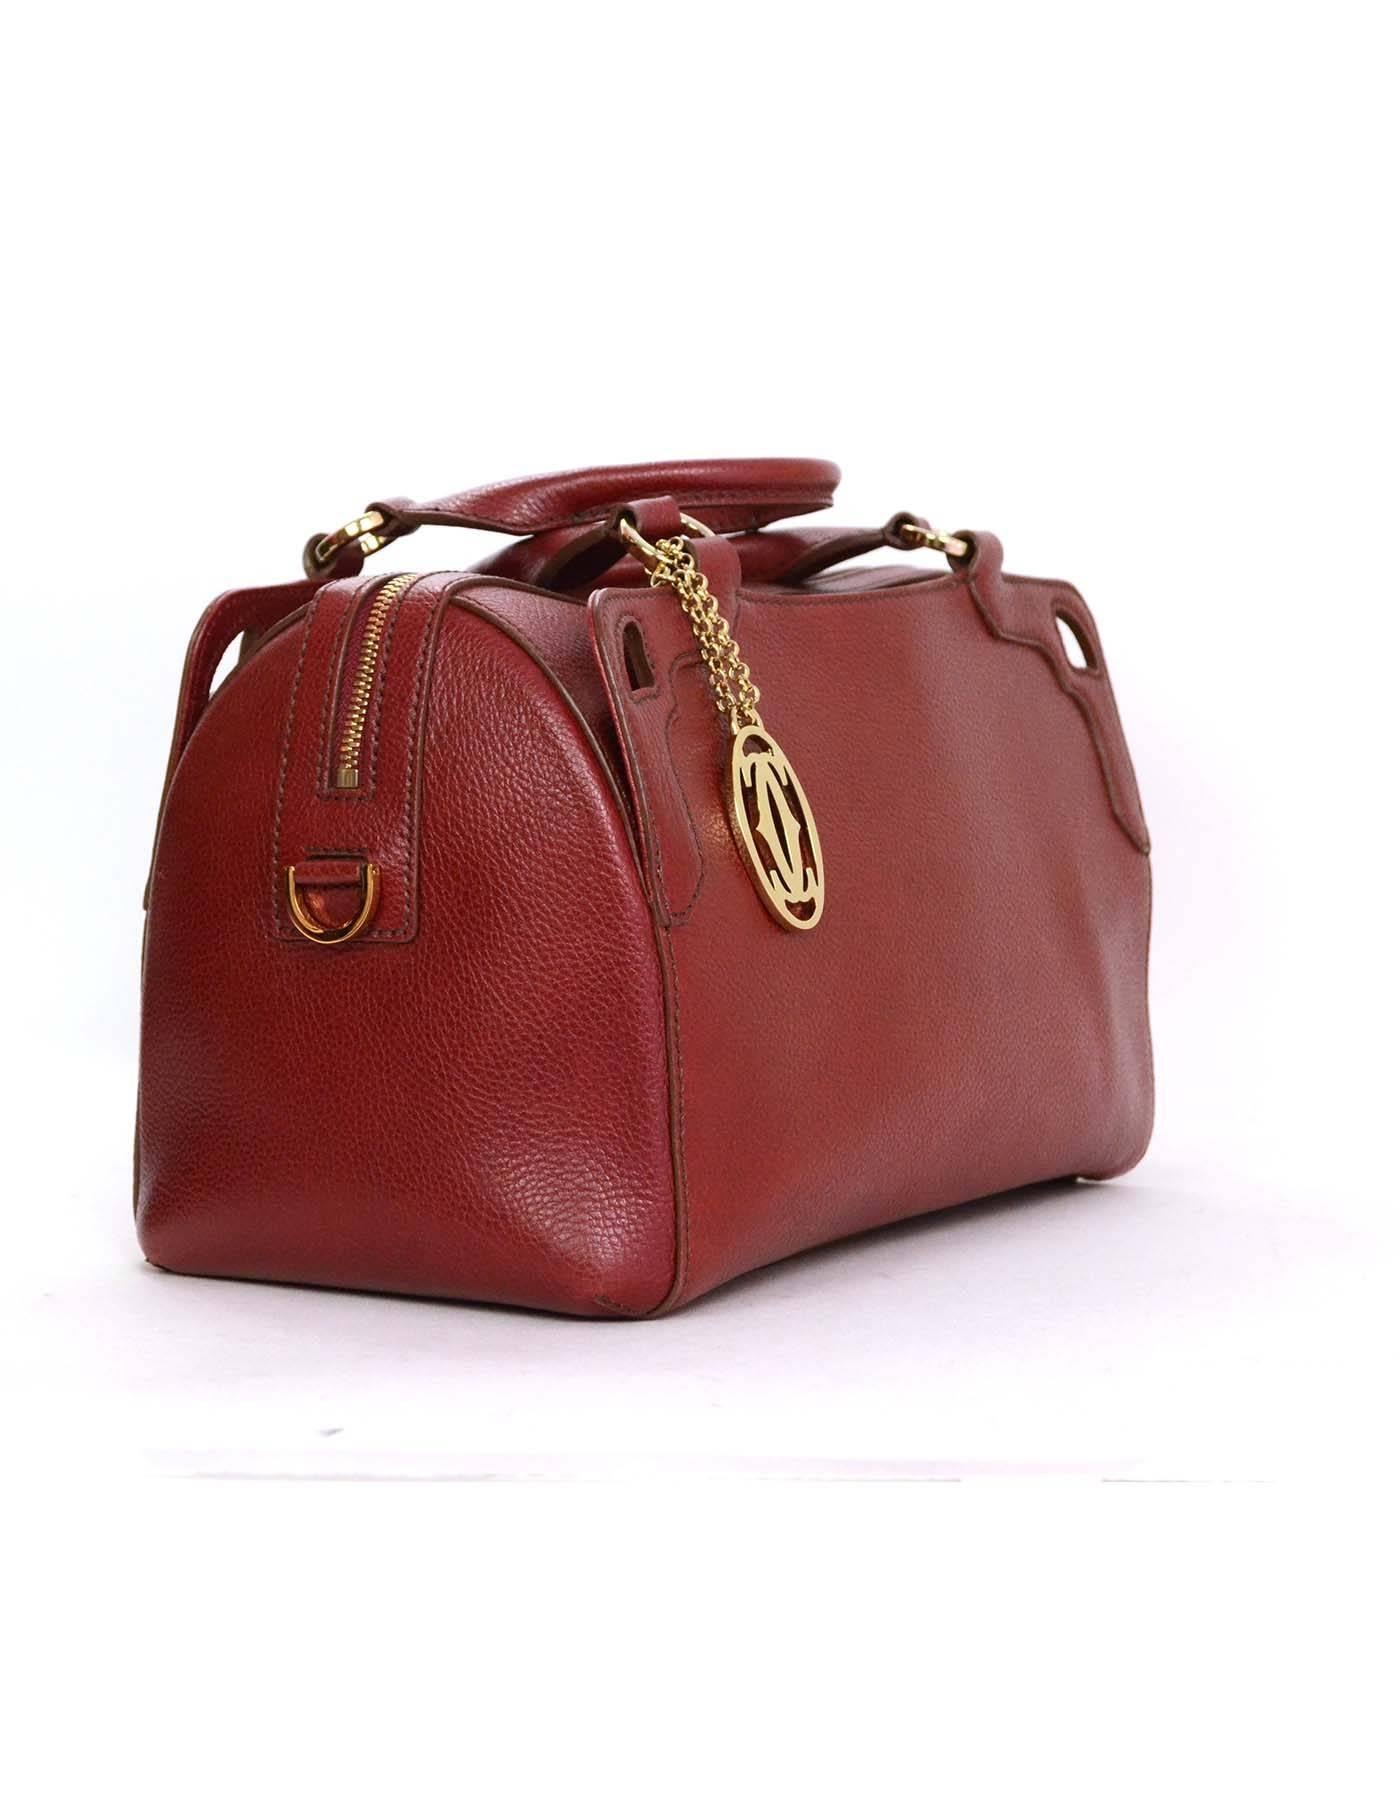 Cartier Bordeaux Doctor Bag

Features goldtone Cartier logo charm

    Made in: Italy
    Color: Bordeaux deep red
    Hardware: Goldtone
    Materials: Leather
    Lining: Beige textile
    Closure/opening: Zip top
    Exterior Pockets: